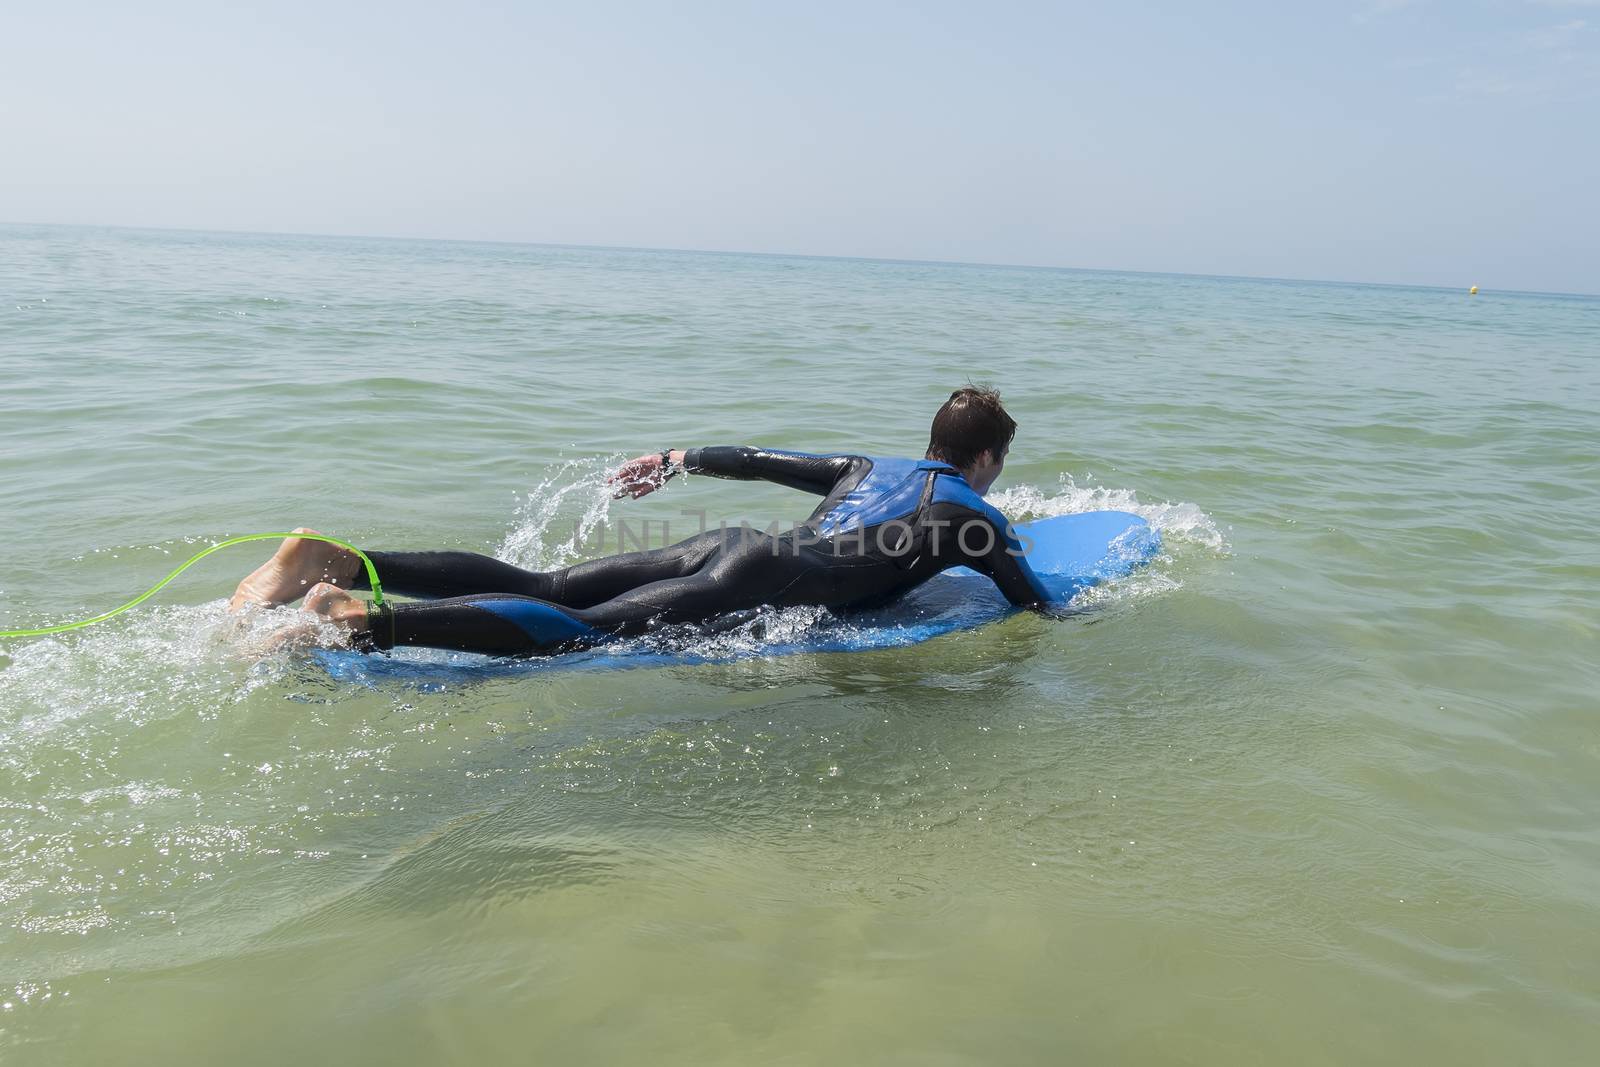 Young boy surfing in the sea